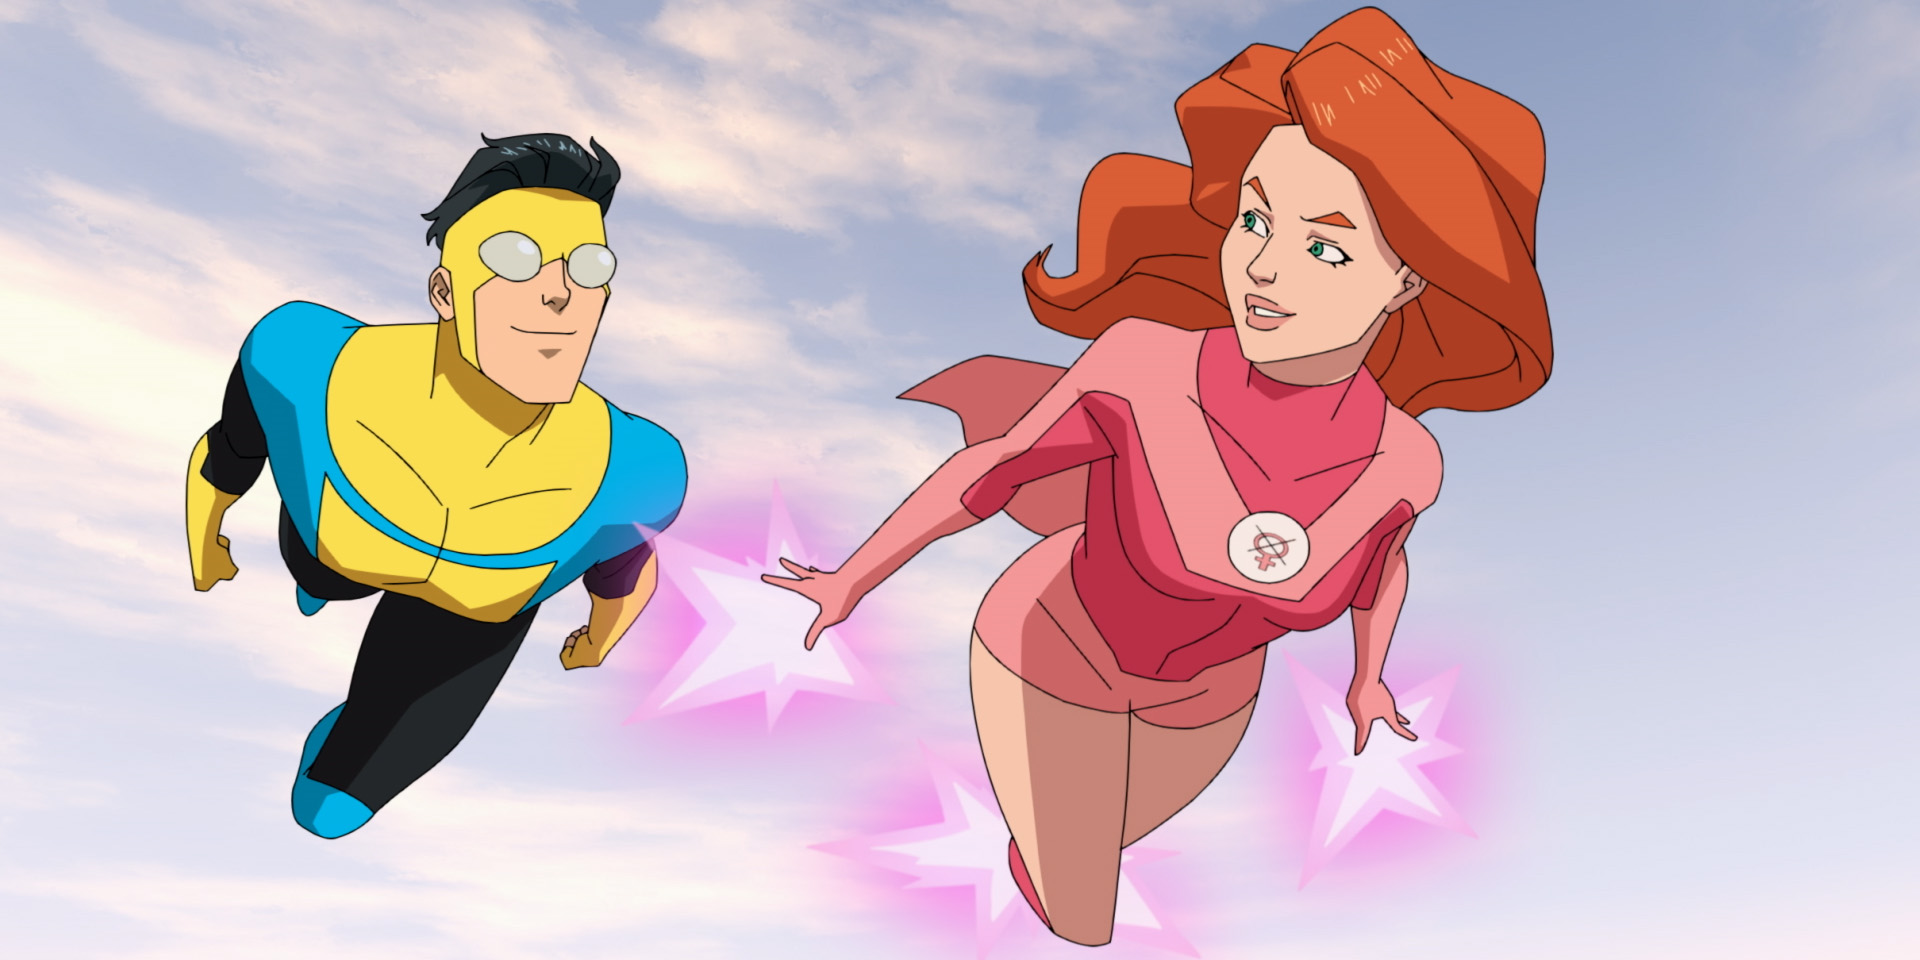 The Long-Awaited Update on Invincible Season 2